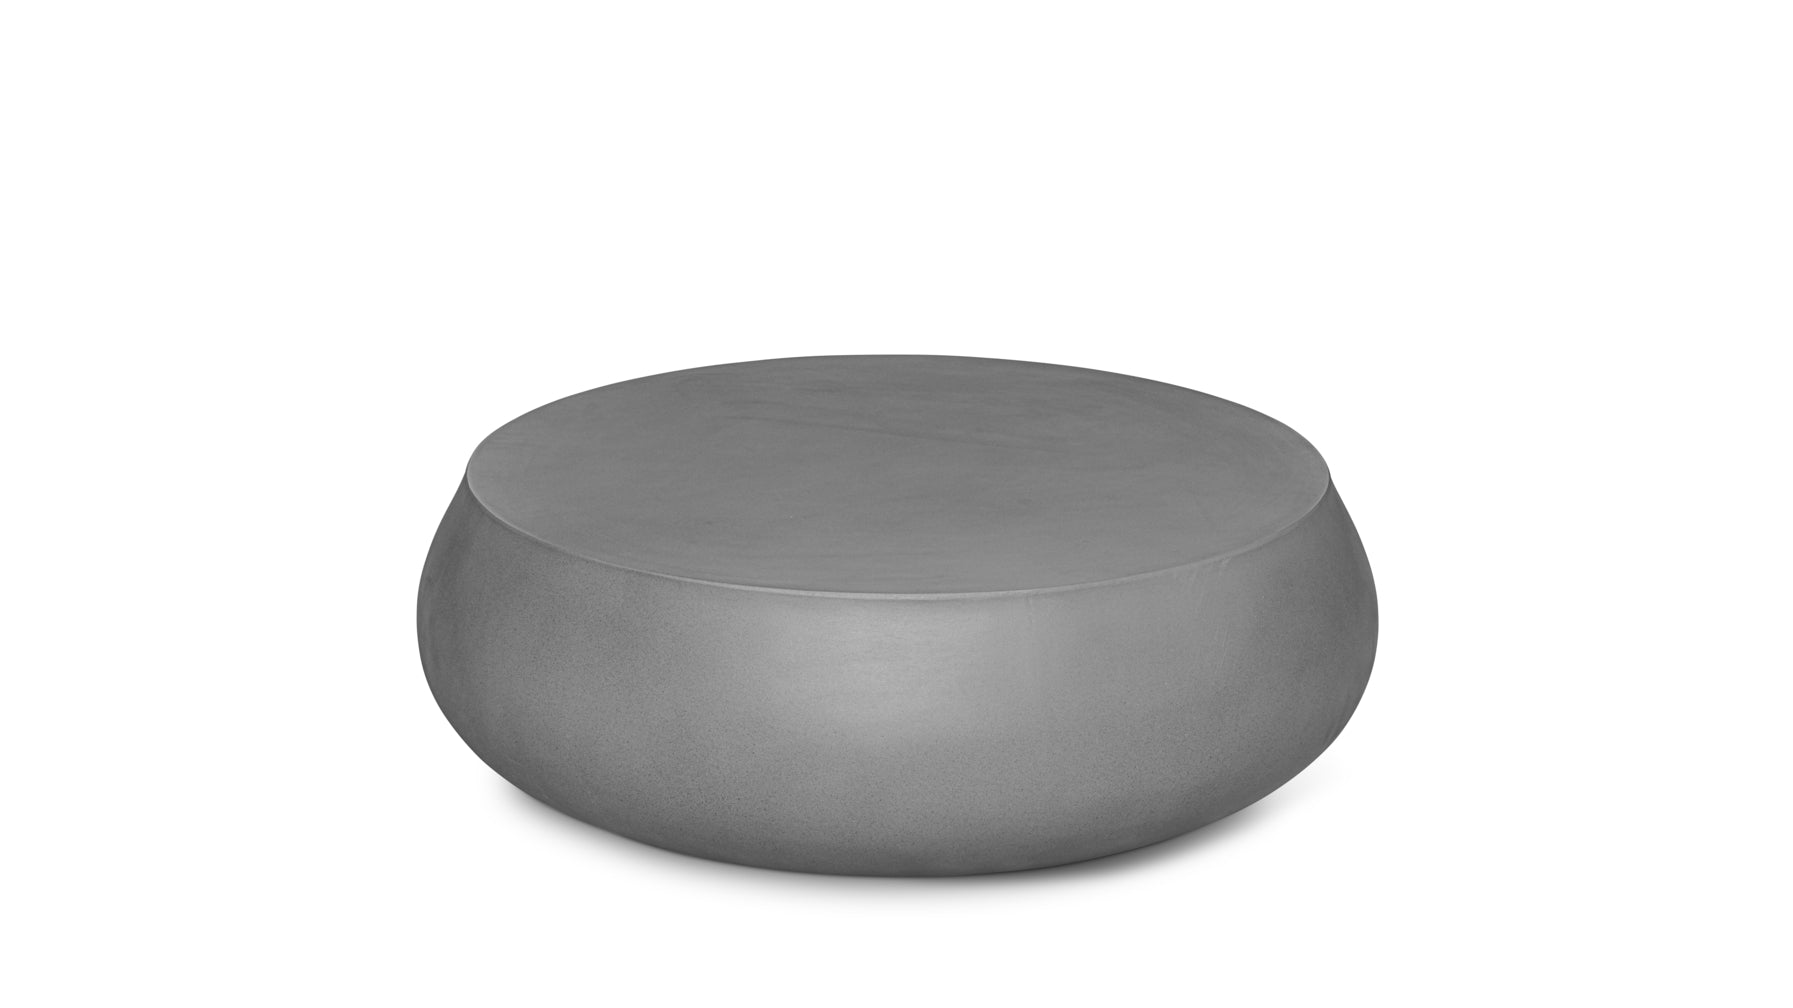 Oasis Outdoor Coffee Table, Concrete - Image 1